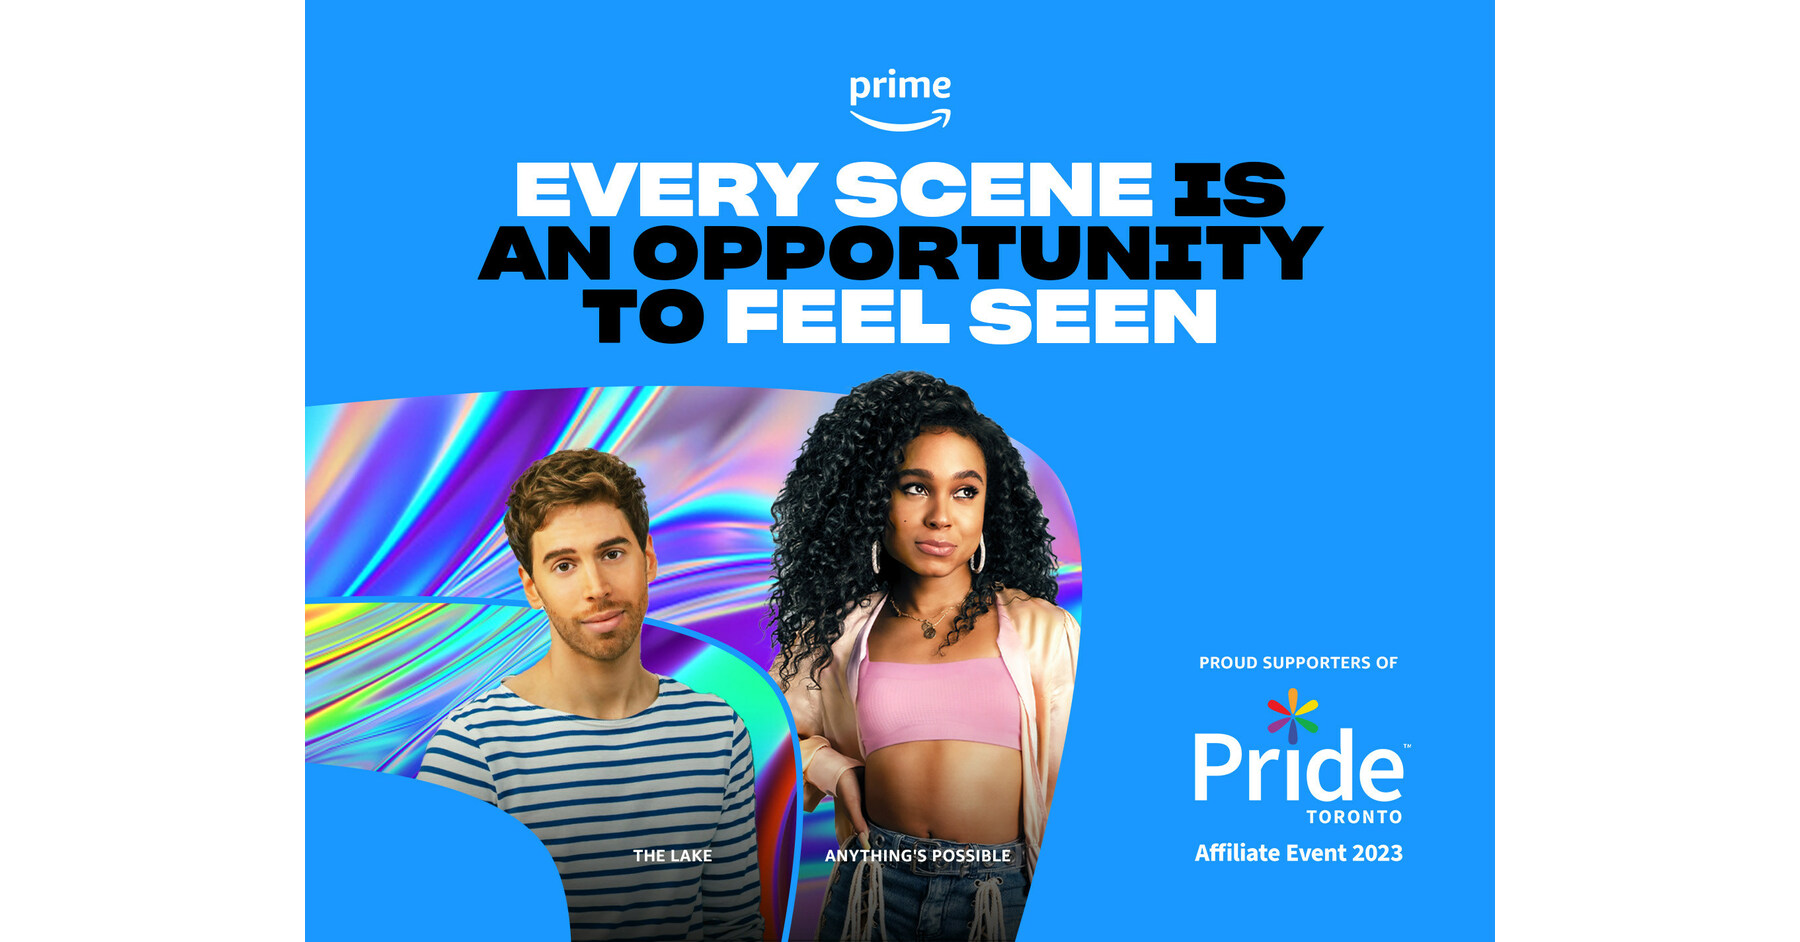 Canada celebrates Pride Month With #ProudToBe and the Prime Video  #NotJustForShow Campaigns, in Partnership With Pride Toronto and Other  Local 2SLGBTQ+ Groups